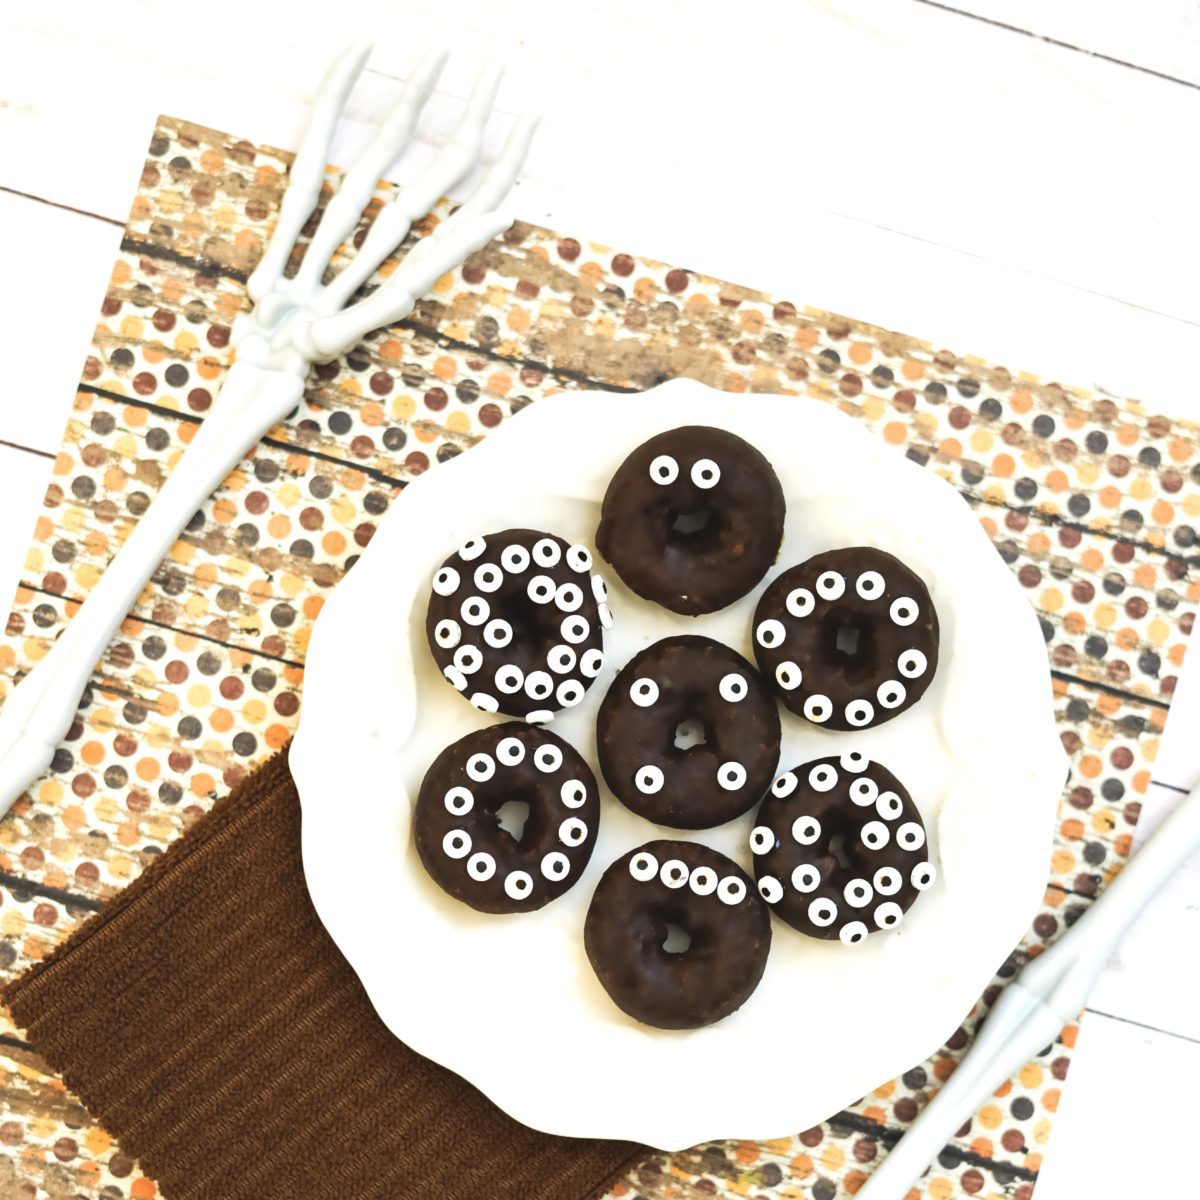 Donuts covered in chocolate and decorative eyes